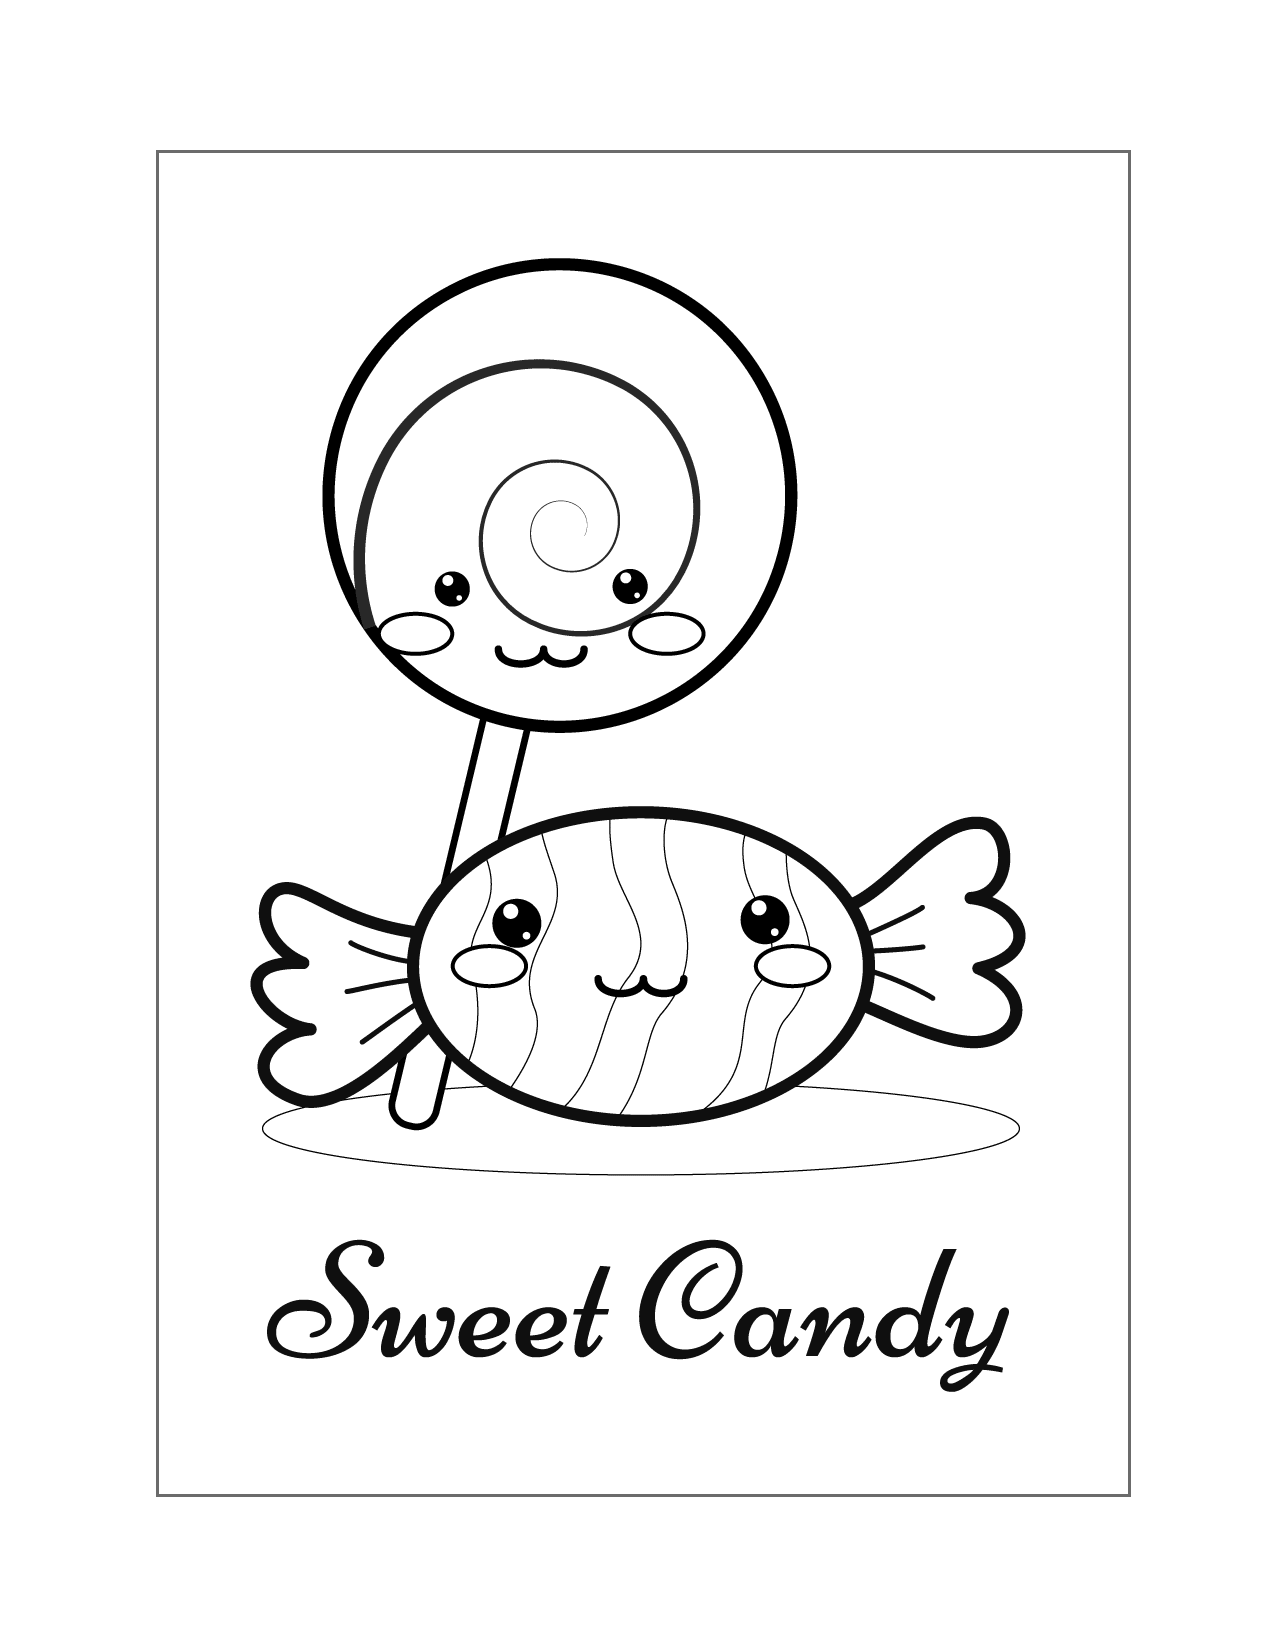 Sweet Candy Coloring Page